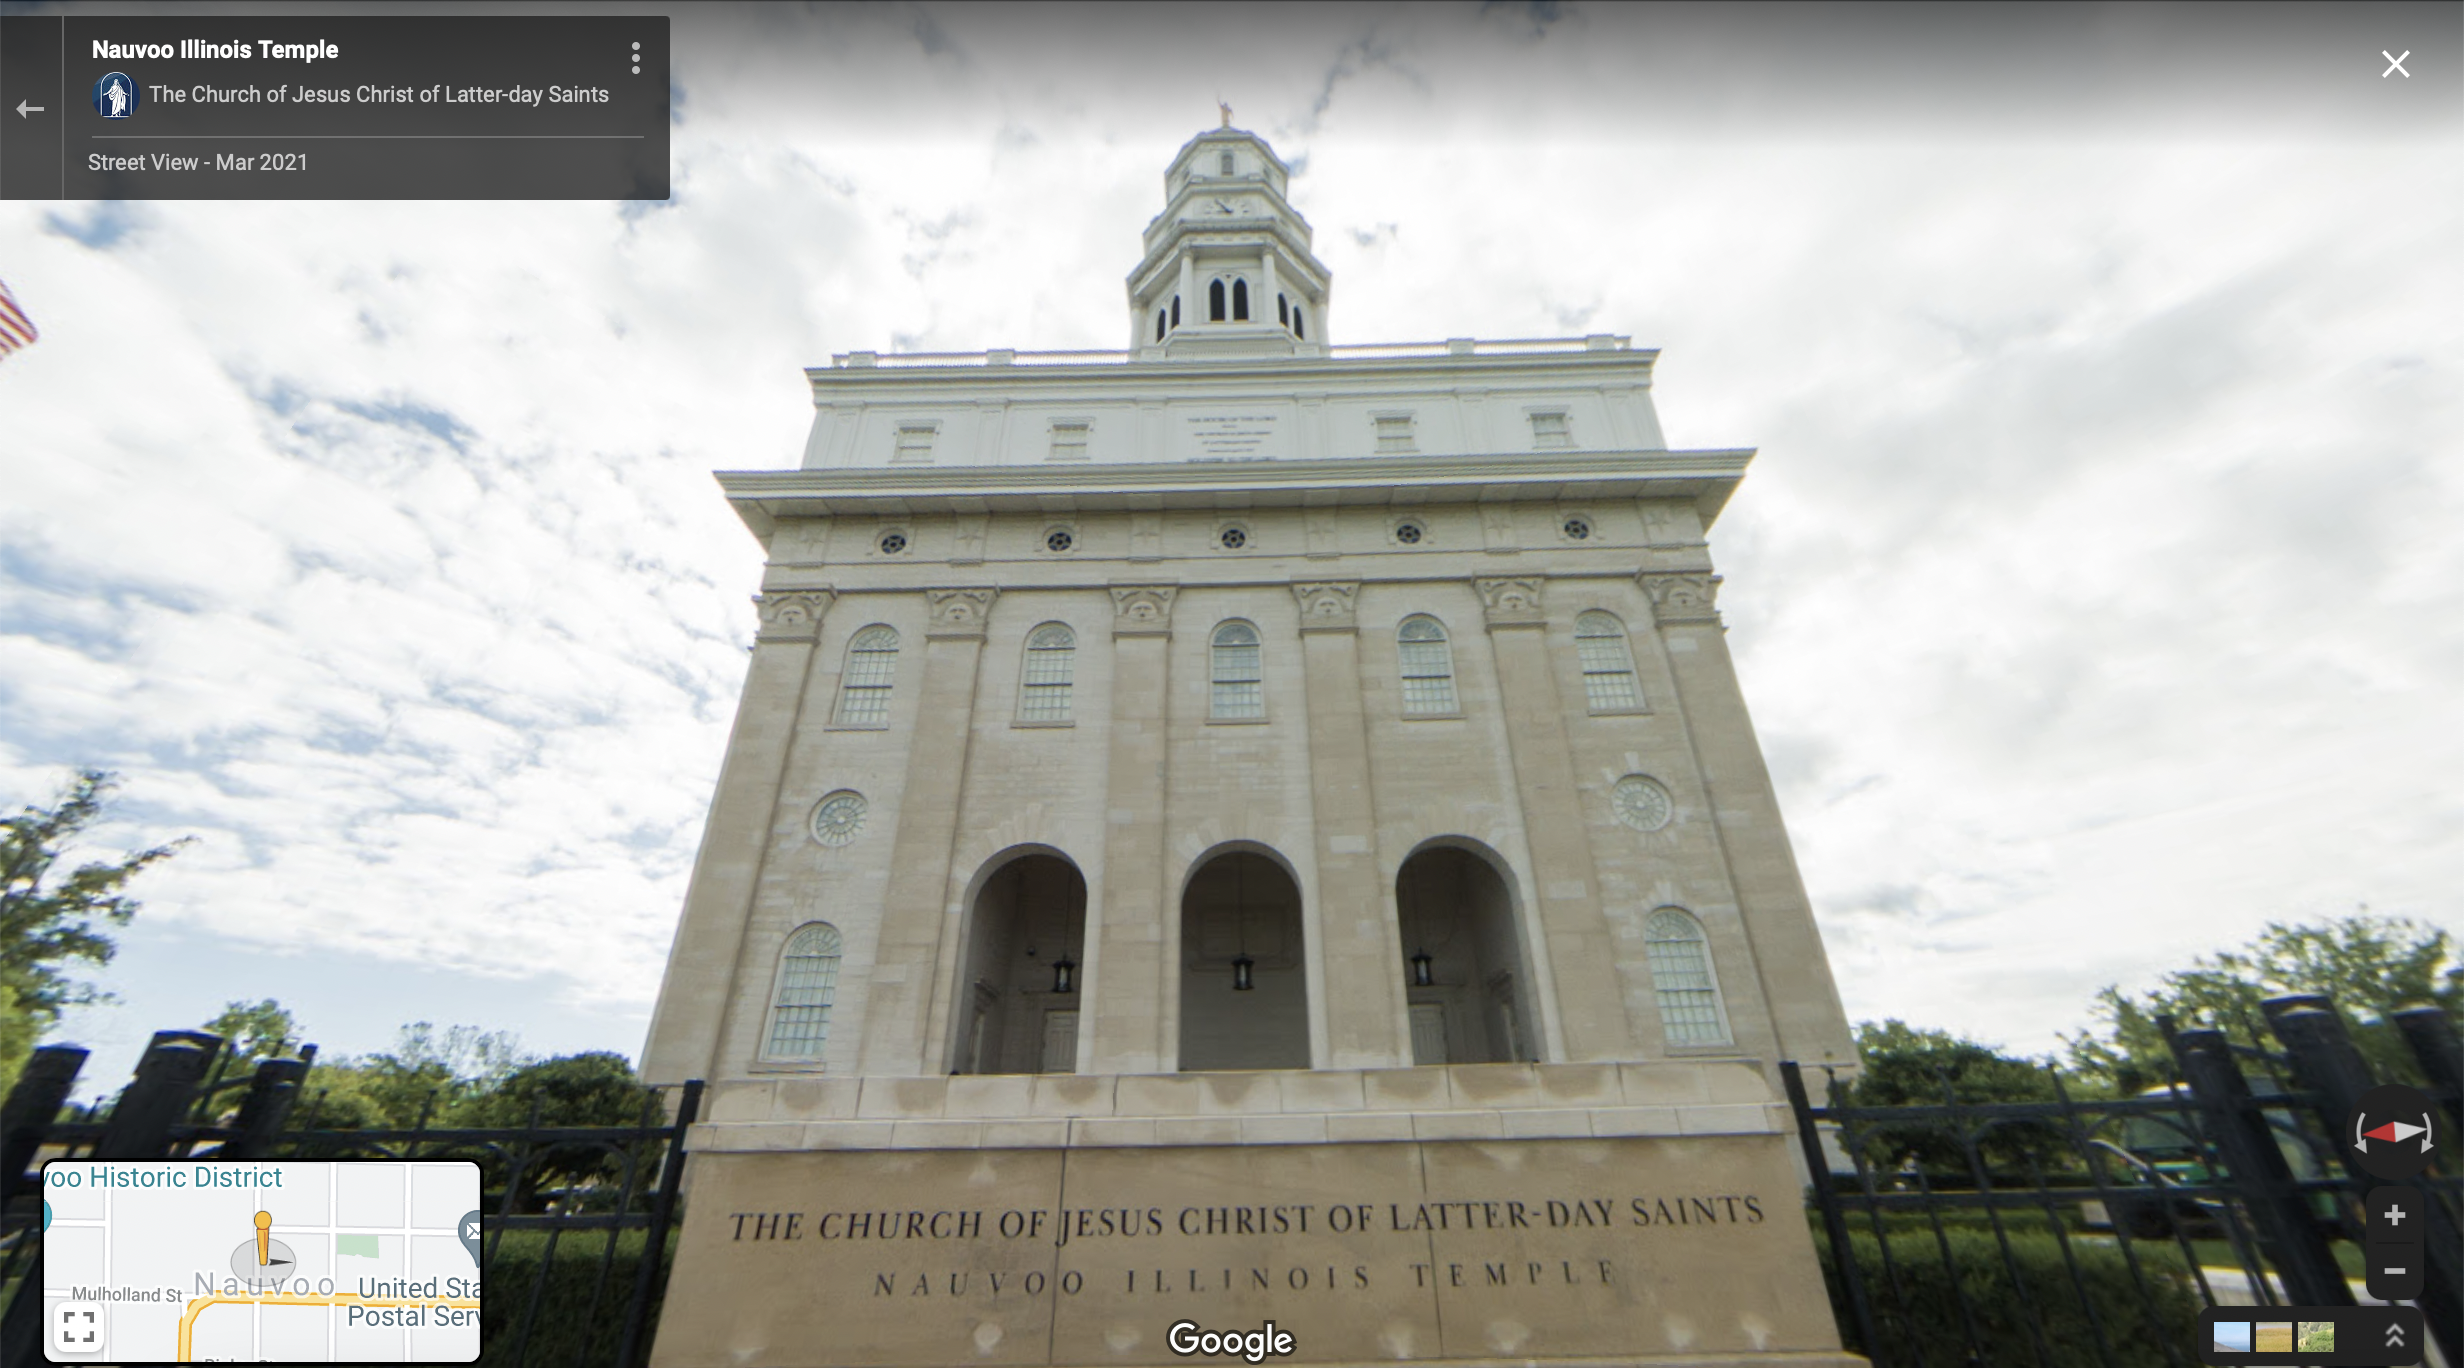 Screenshot of the Google Maps 360 view of the Nauvoo Temple